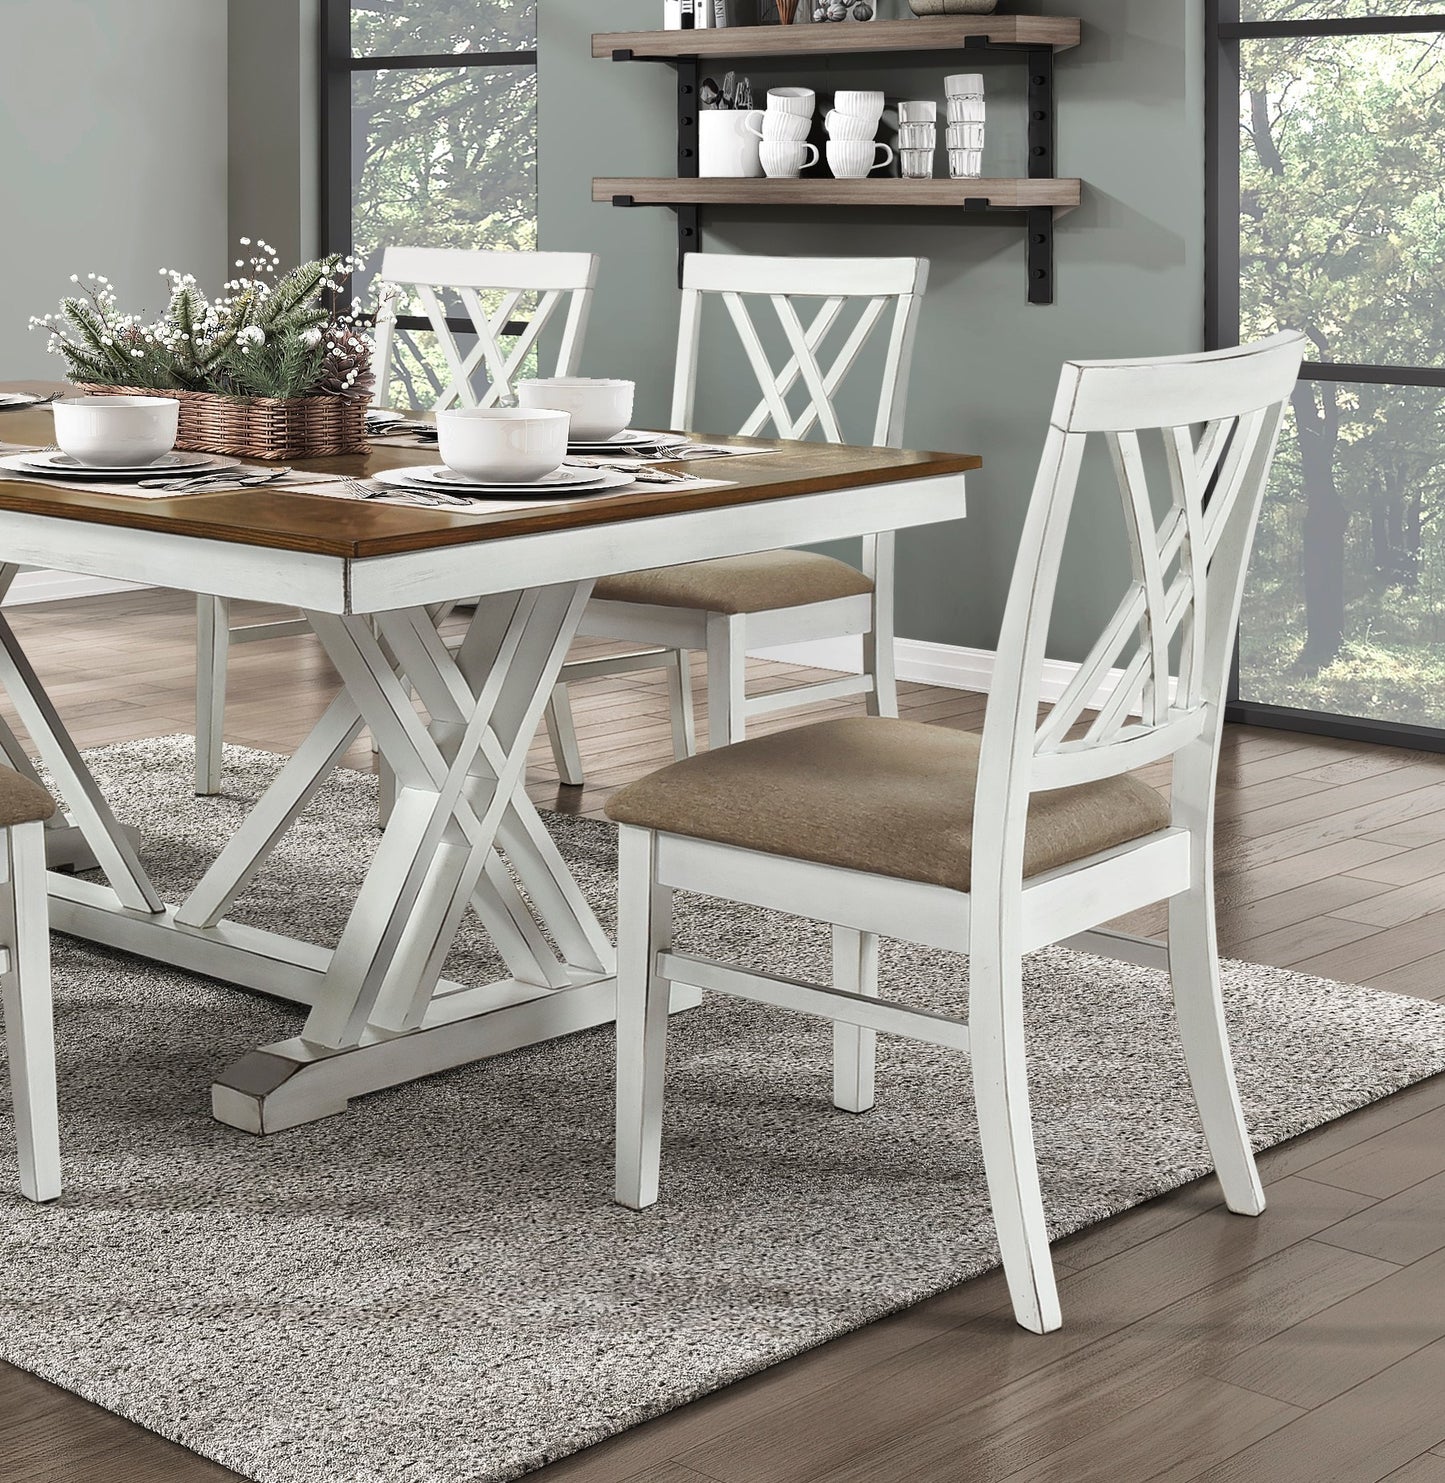 Modern Style White and Oak Finish 7pc Dining Set Table w Extension Leaf 6x Side Chairs Upholstered Seat Charming Traditional Dining Room Furniture